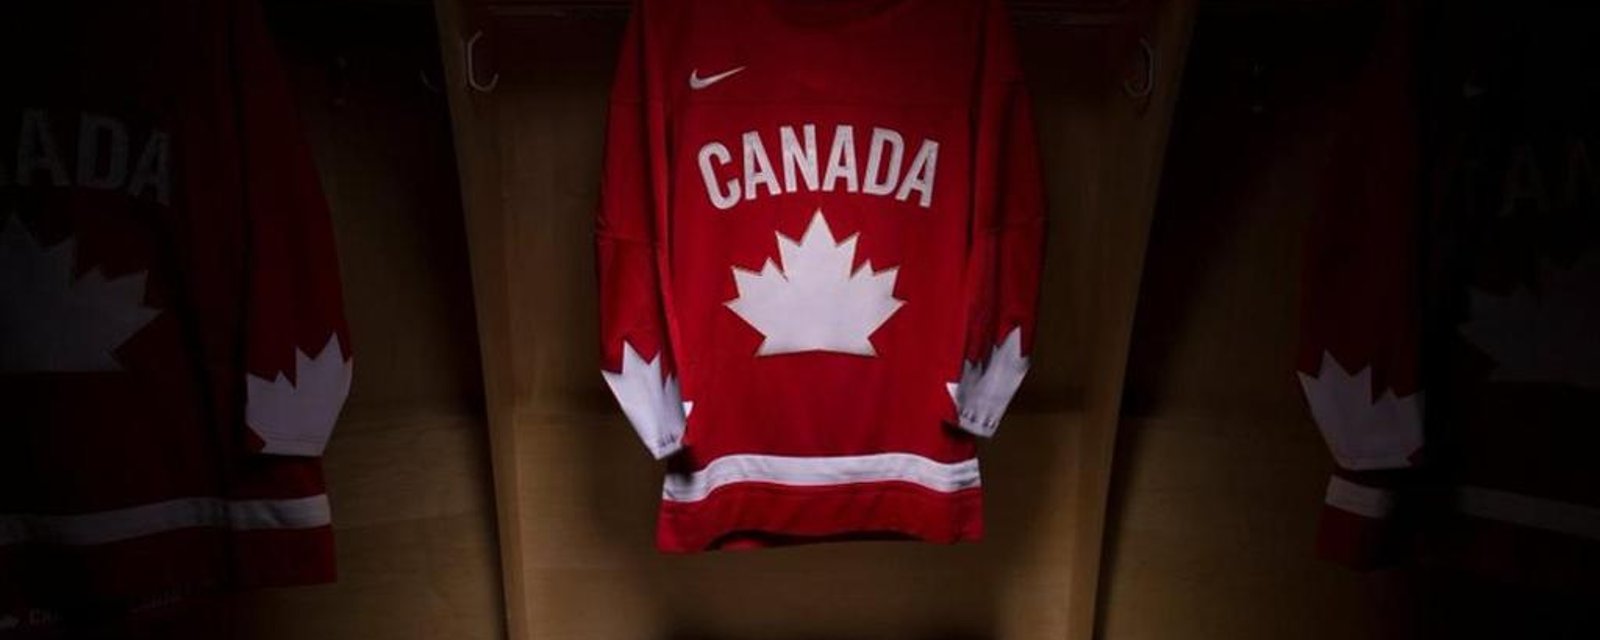 TEAM CANADA: Insider reveals why players involved in 2018 sexual assault scandal remain anonymous